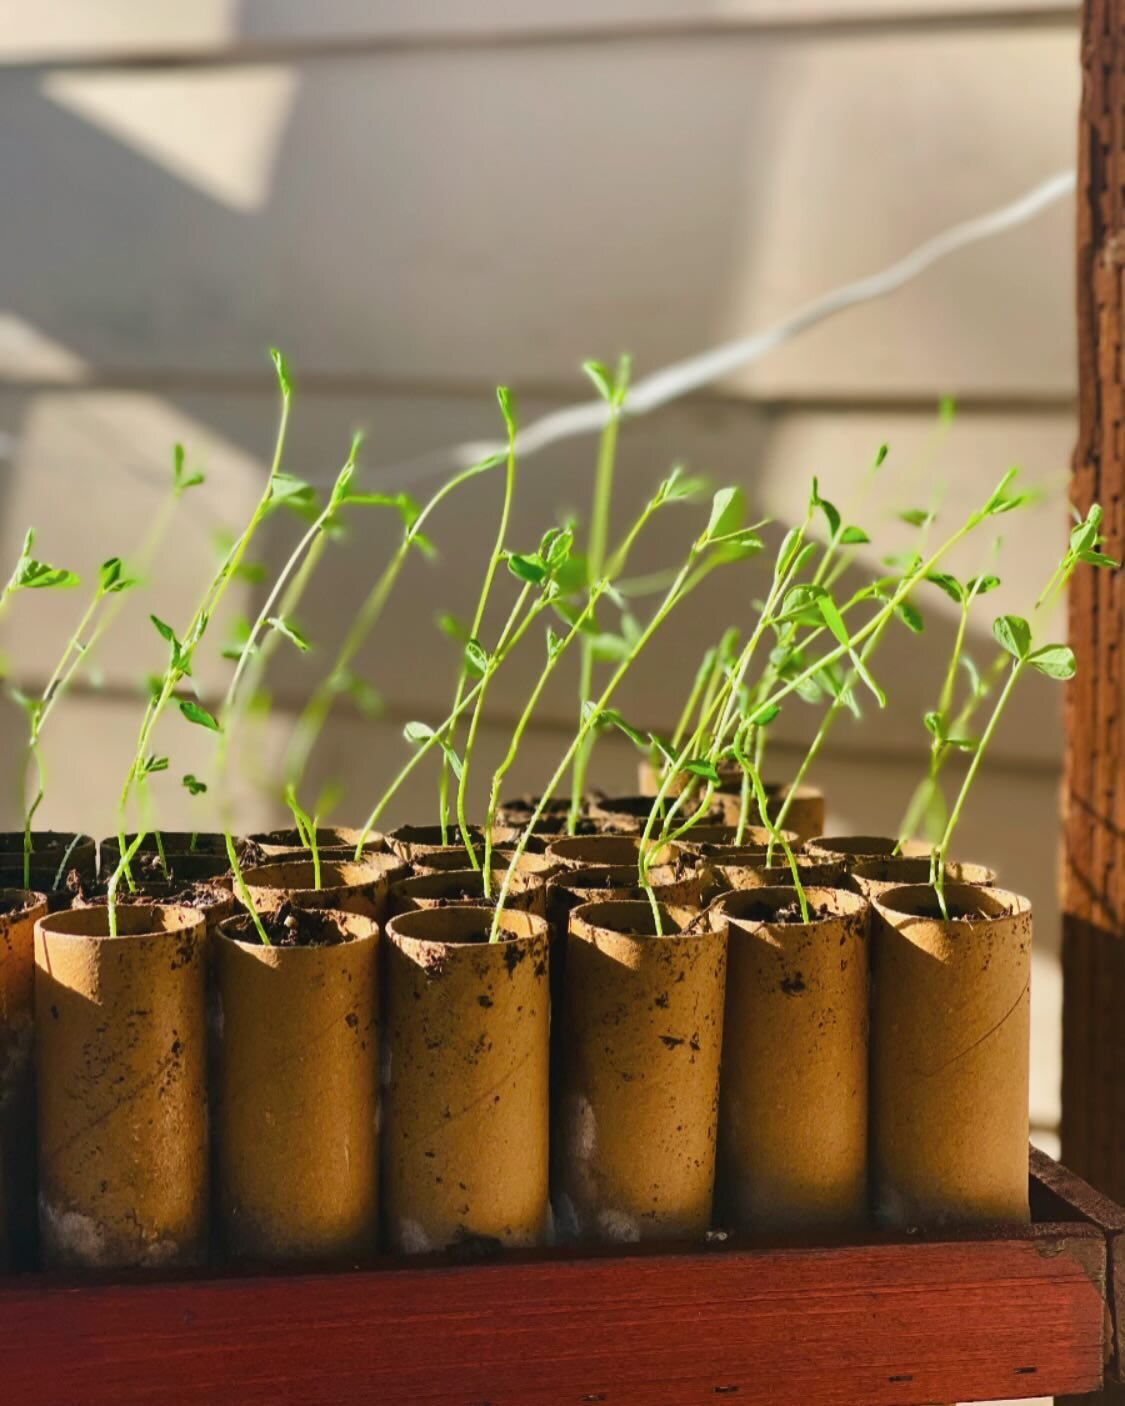 Hardening off my sweet peas. They&rsquo;ve been growing for about two weeks now and I&rsquo;m excited to get them in the ground this weekend!

When plants are started indoors they grow up very protected. There is no wind to knock them around and the 